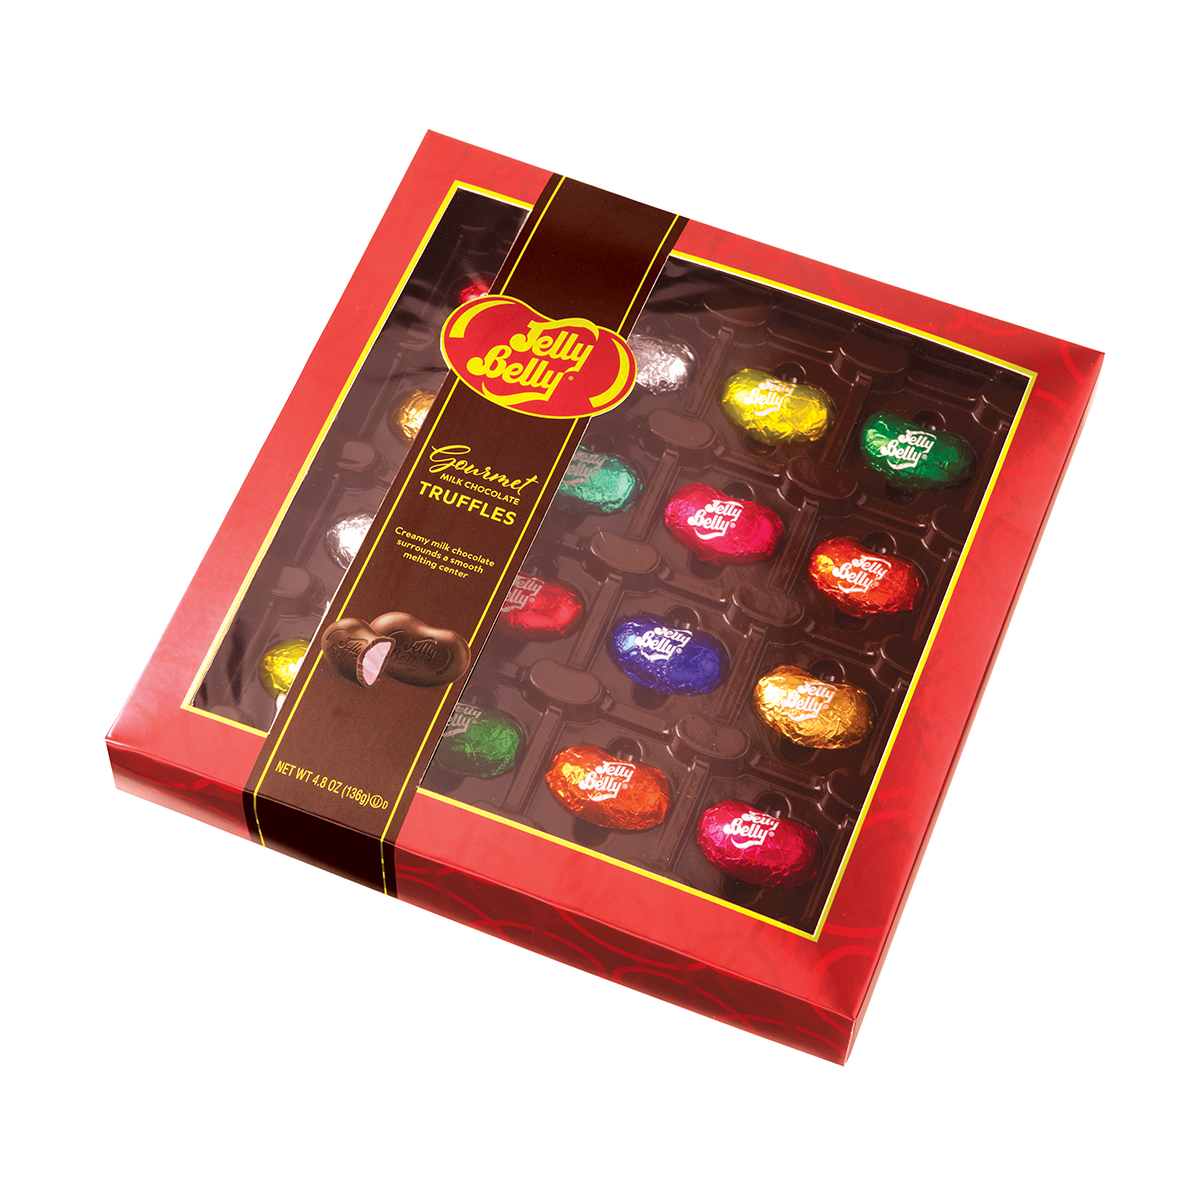 Jelly Belly Gourmet Chocolates